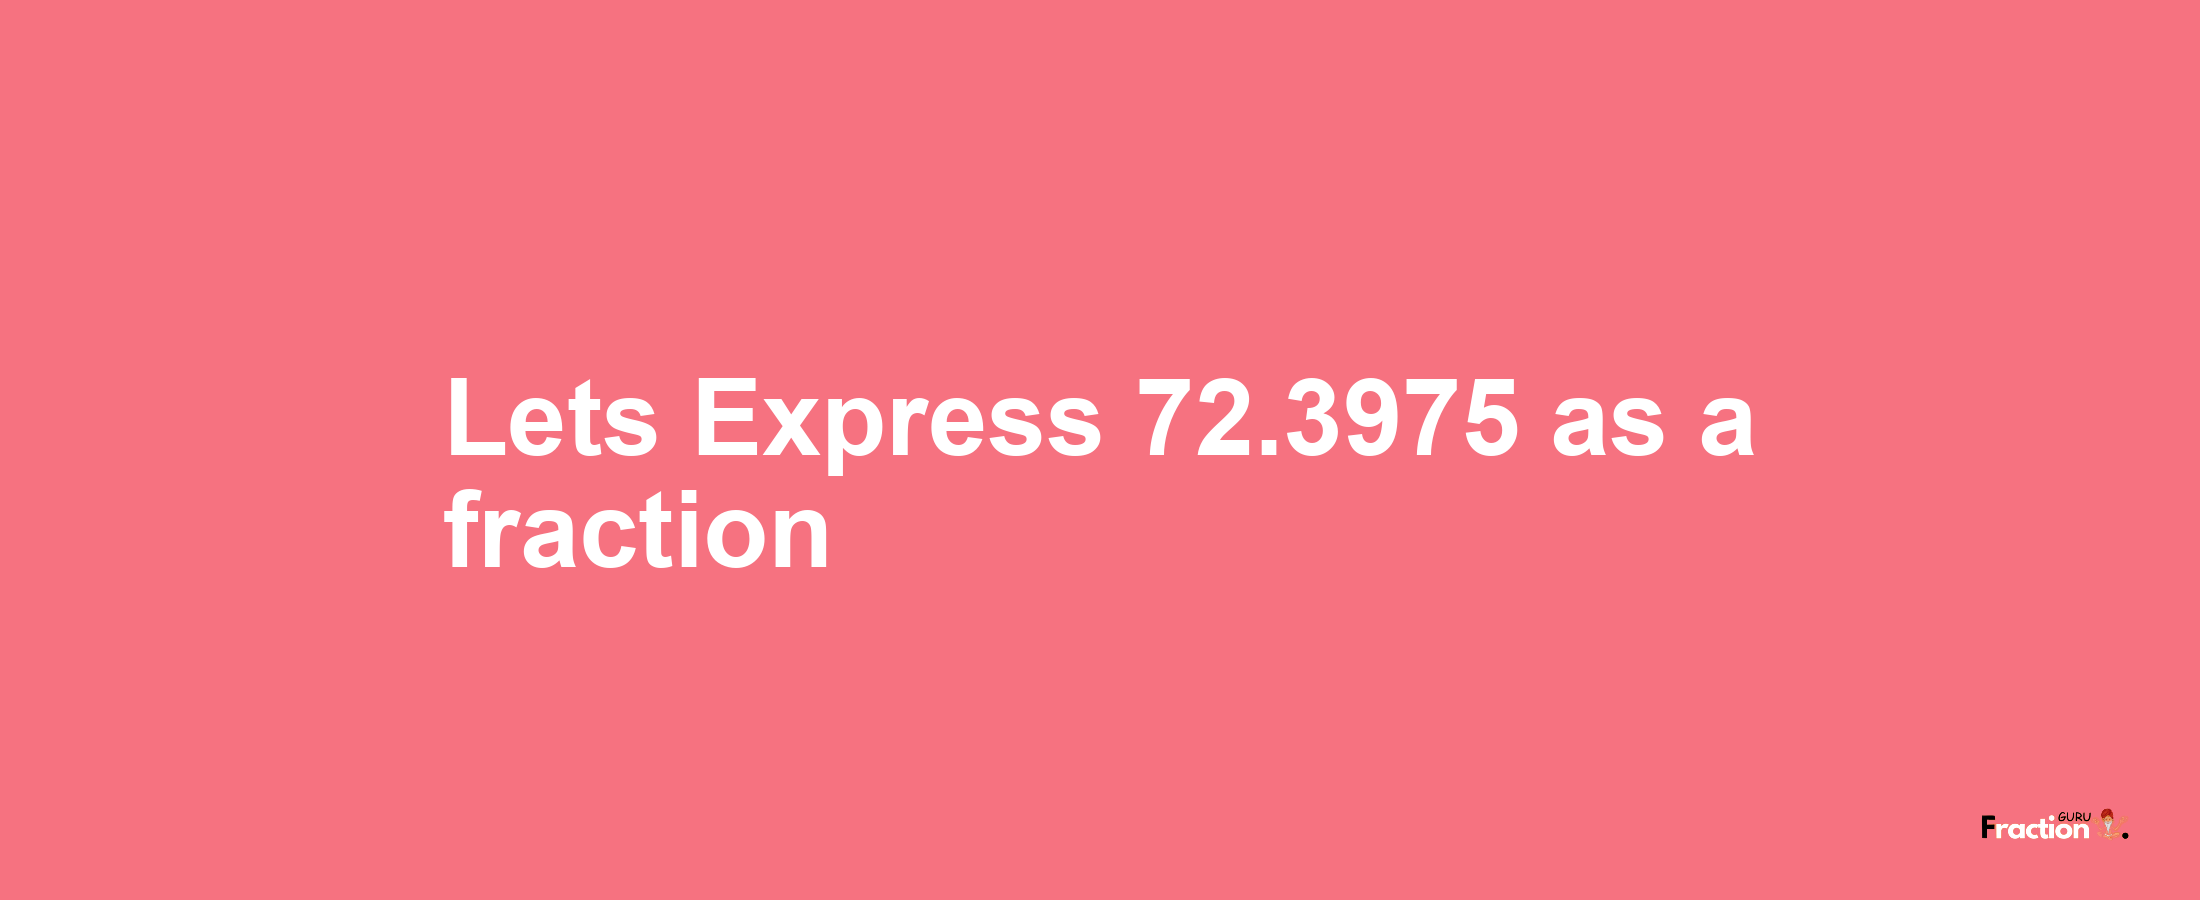 Lets Express 72.3975 as afraction